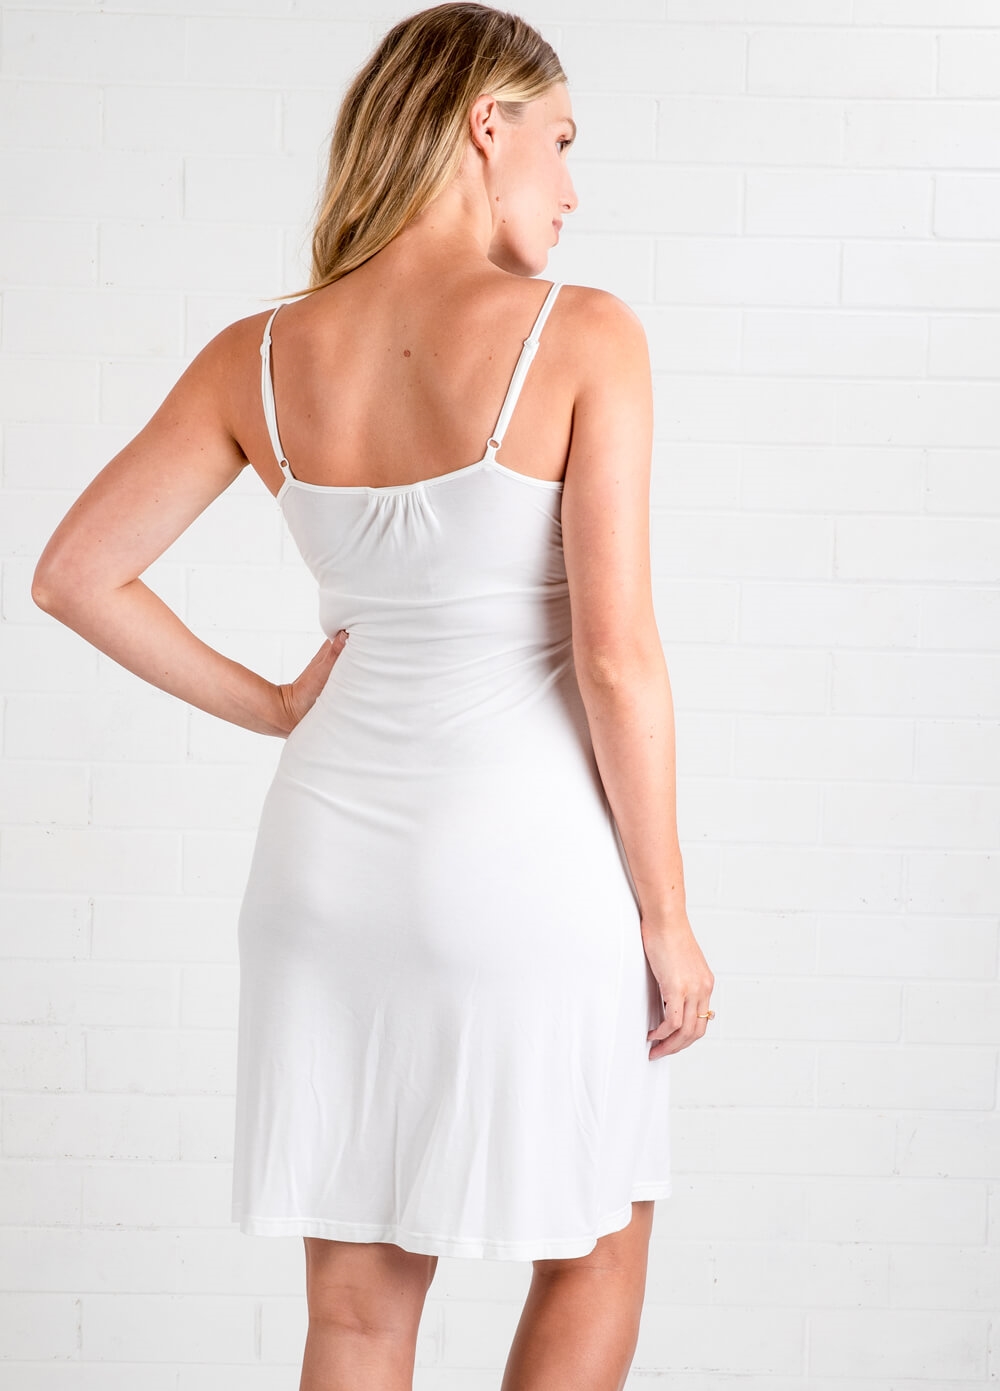 Lait & Co - Moselle Ivory Maternity Nursing Chemise | Queen Bee